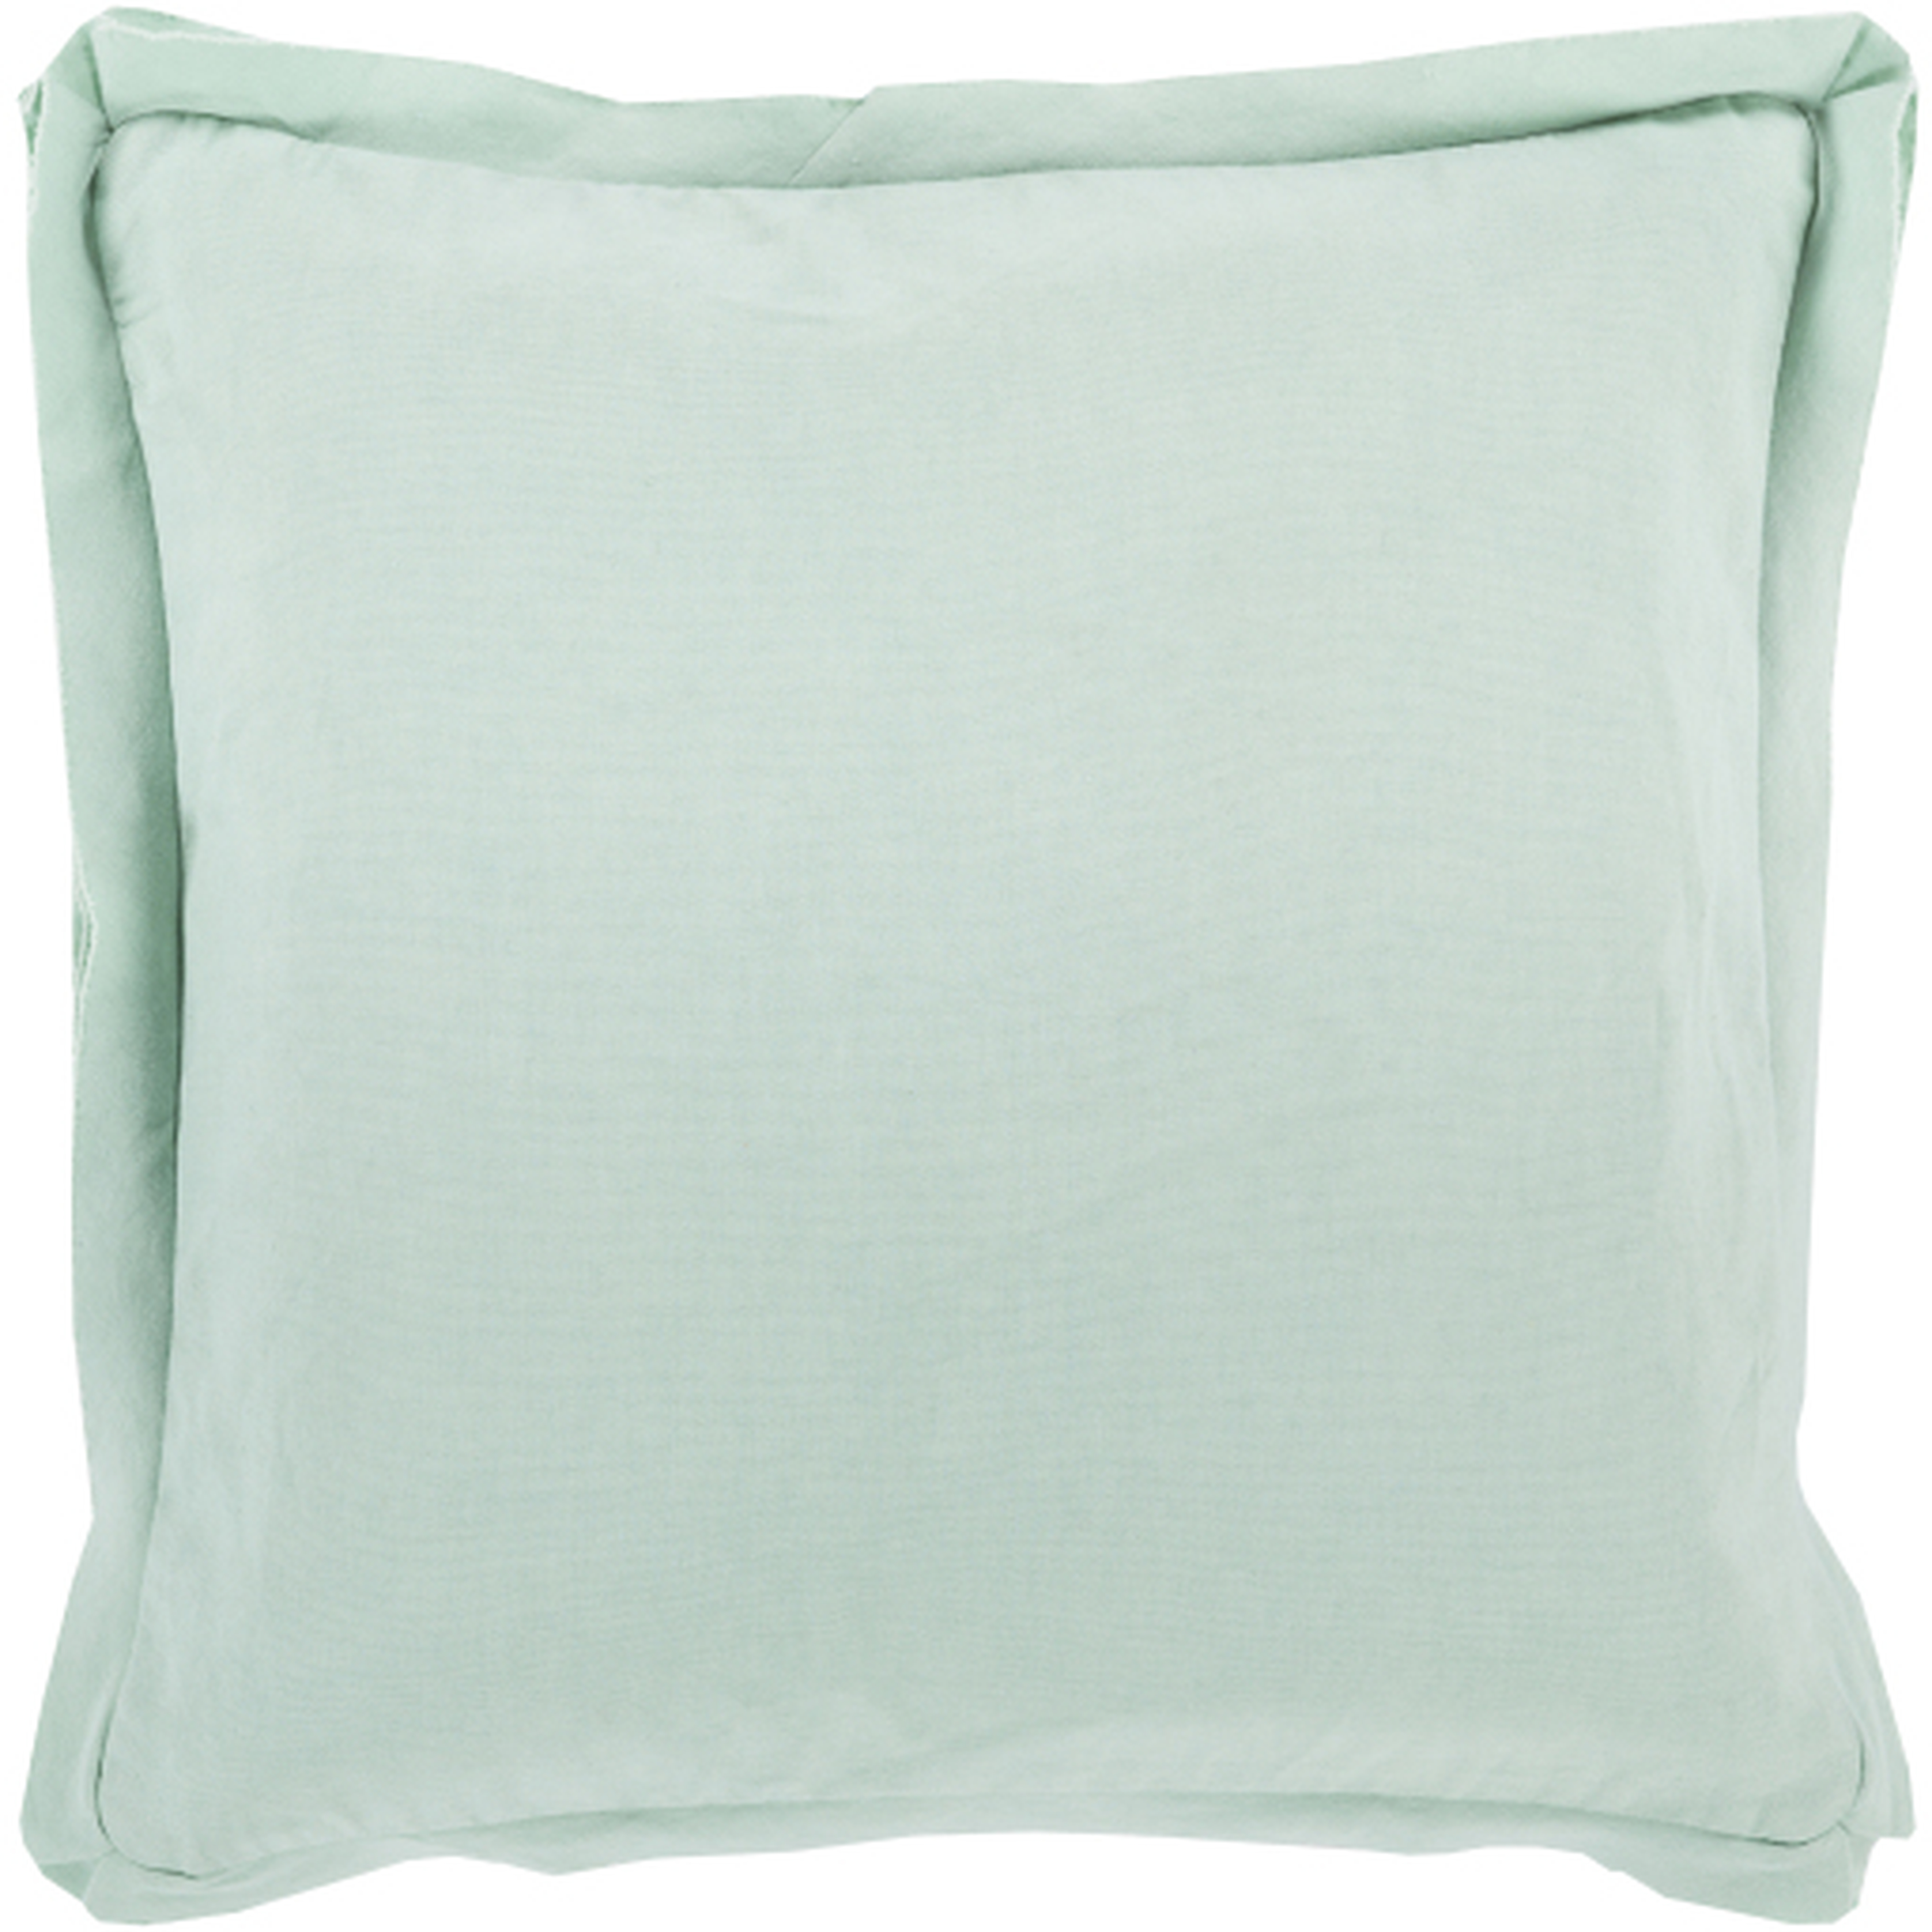 Triple Flange - TF-009 - 22" x 22" - pillow cover only - Surya